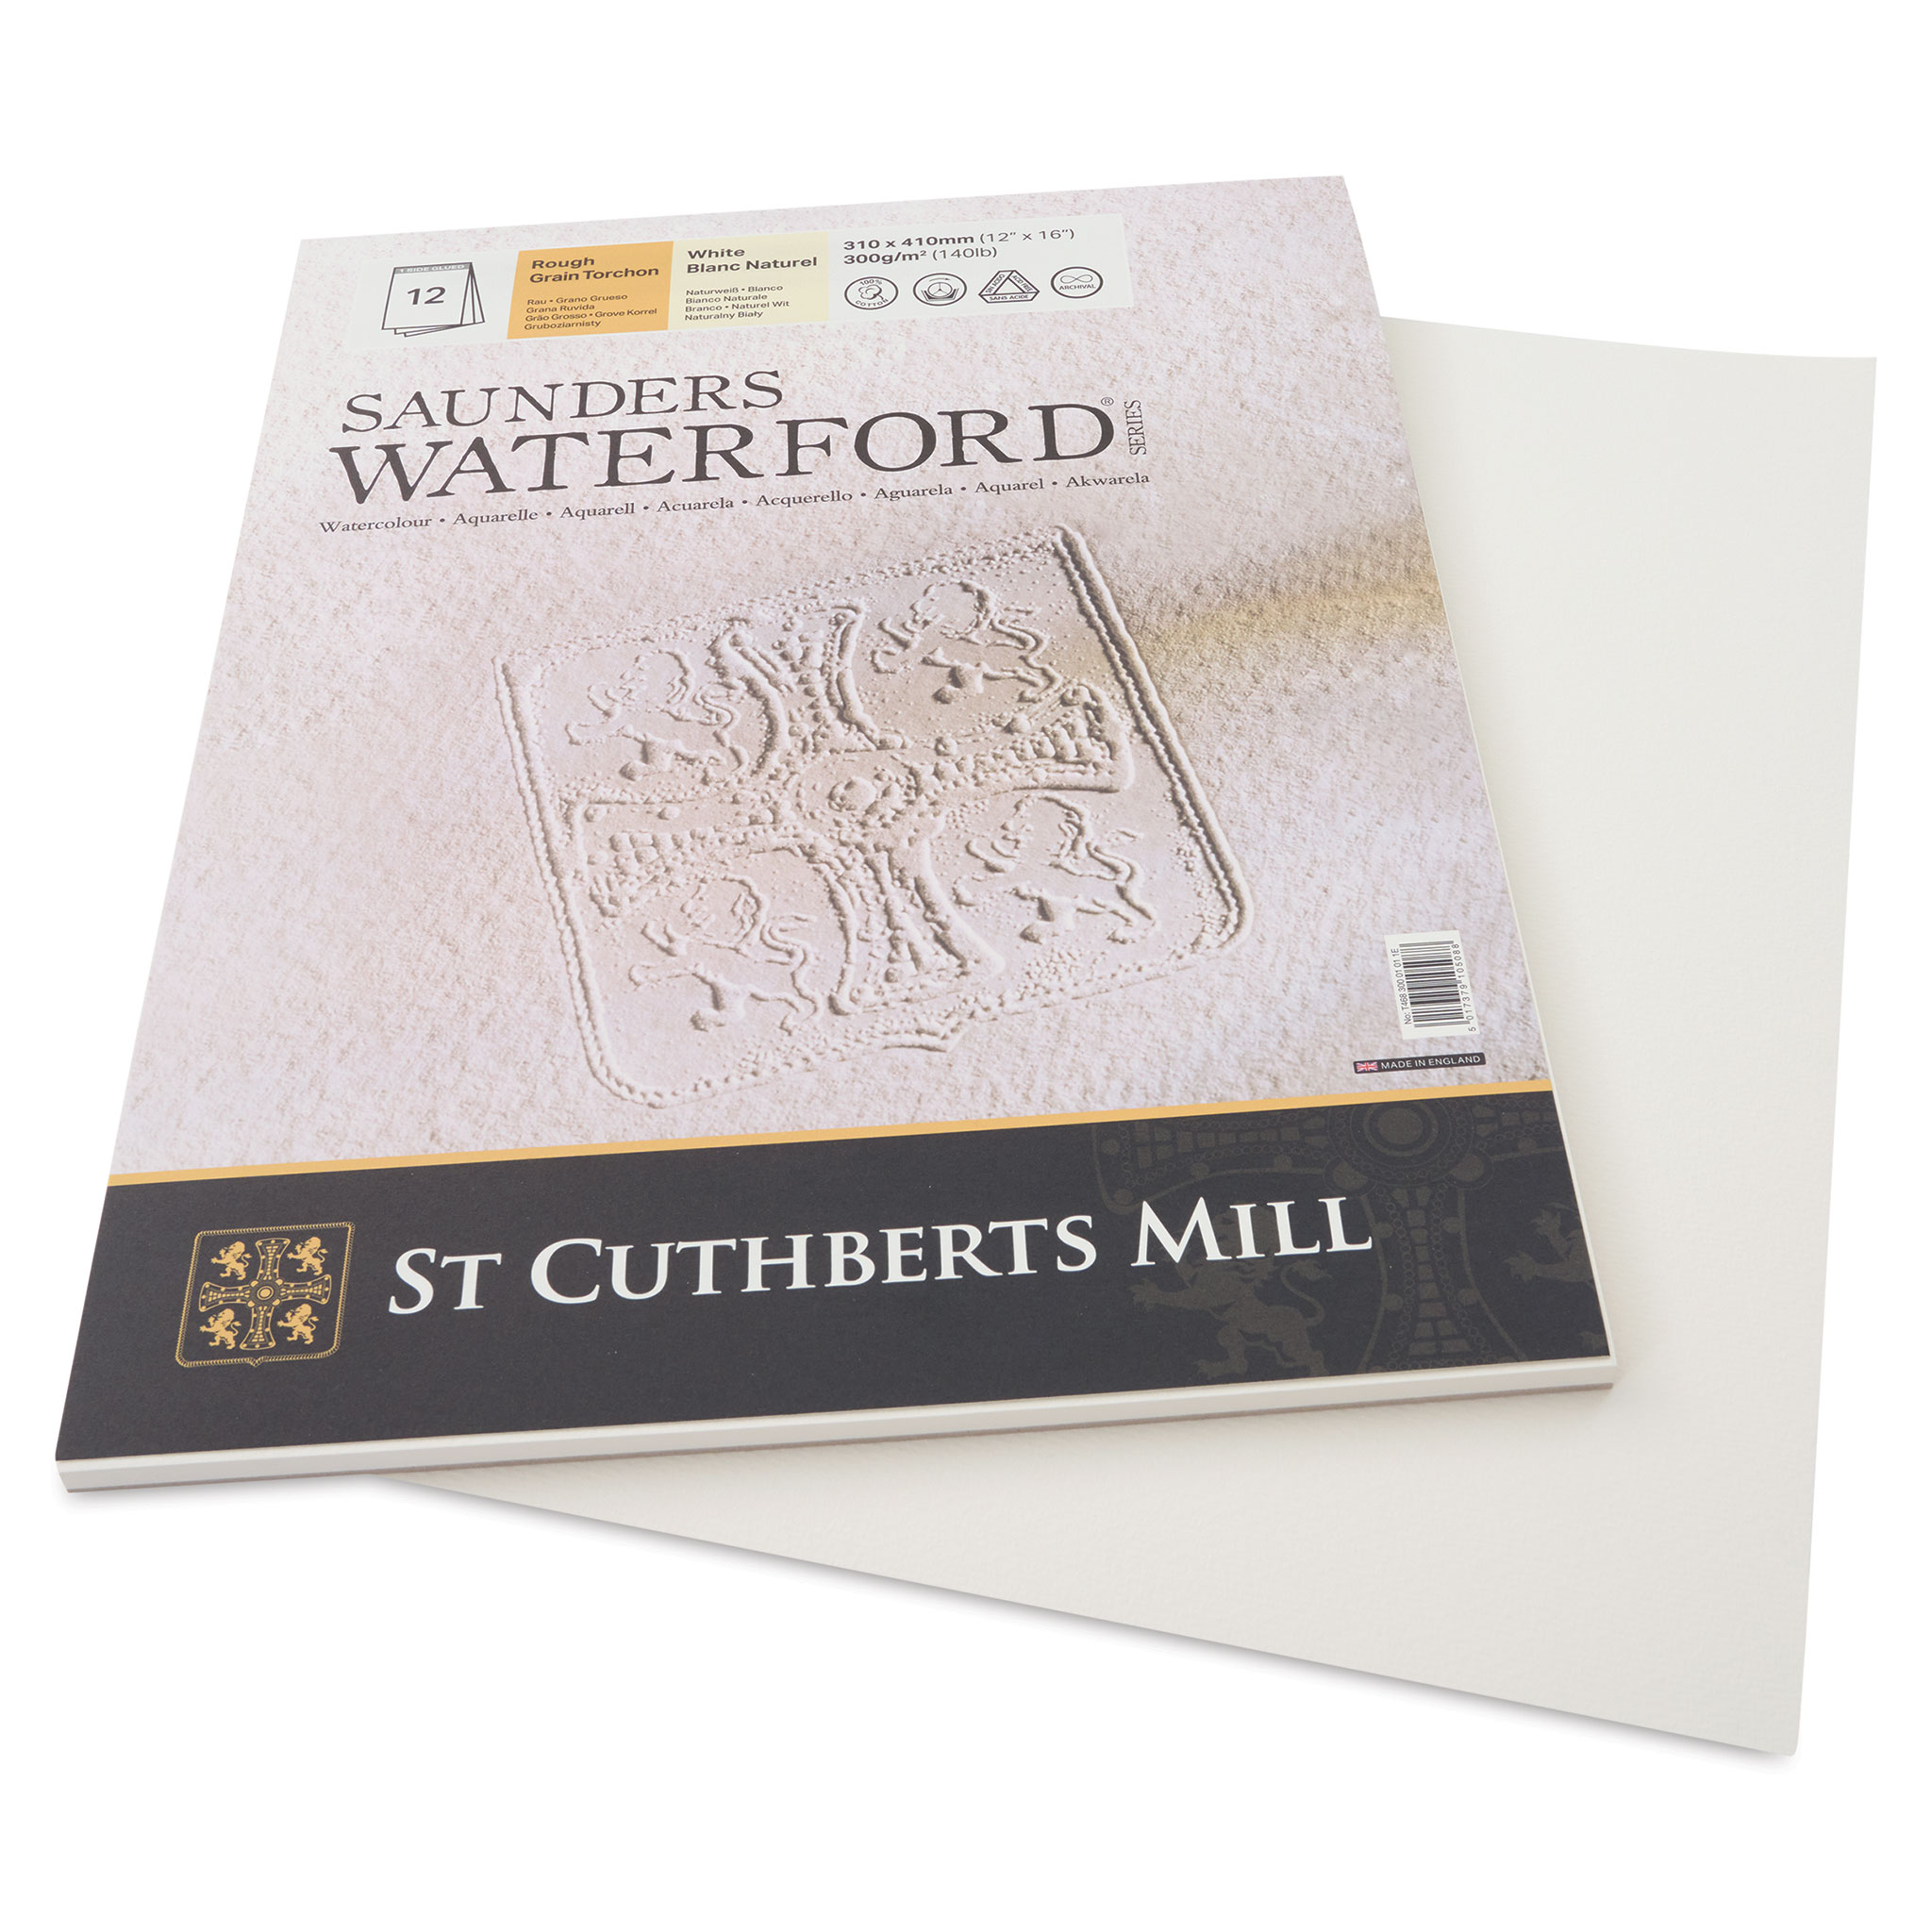 Saunders Waterford Watercolor Pad - 12 x 16, Rough, 140 lb, 12 Sheets